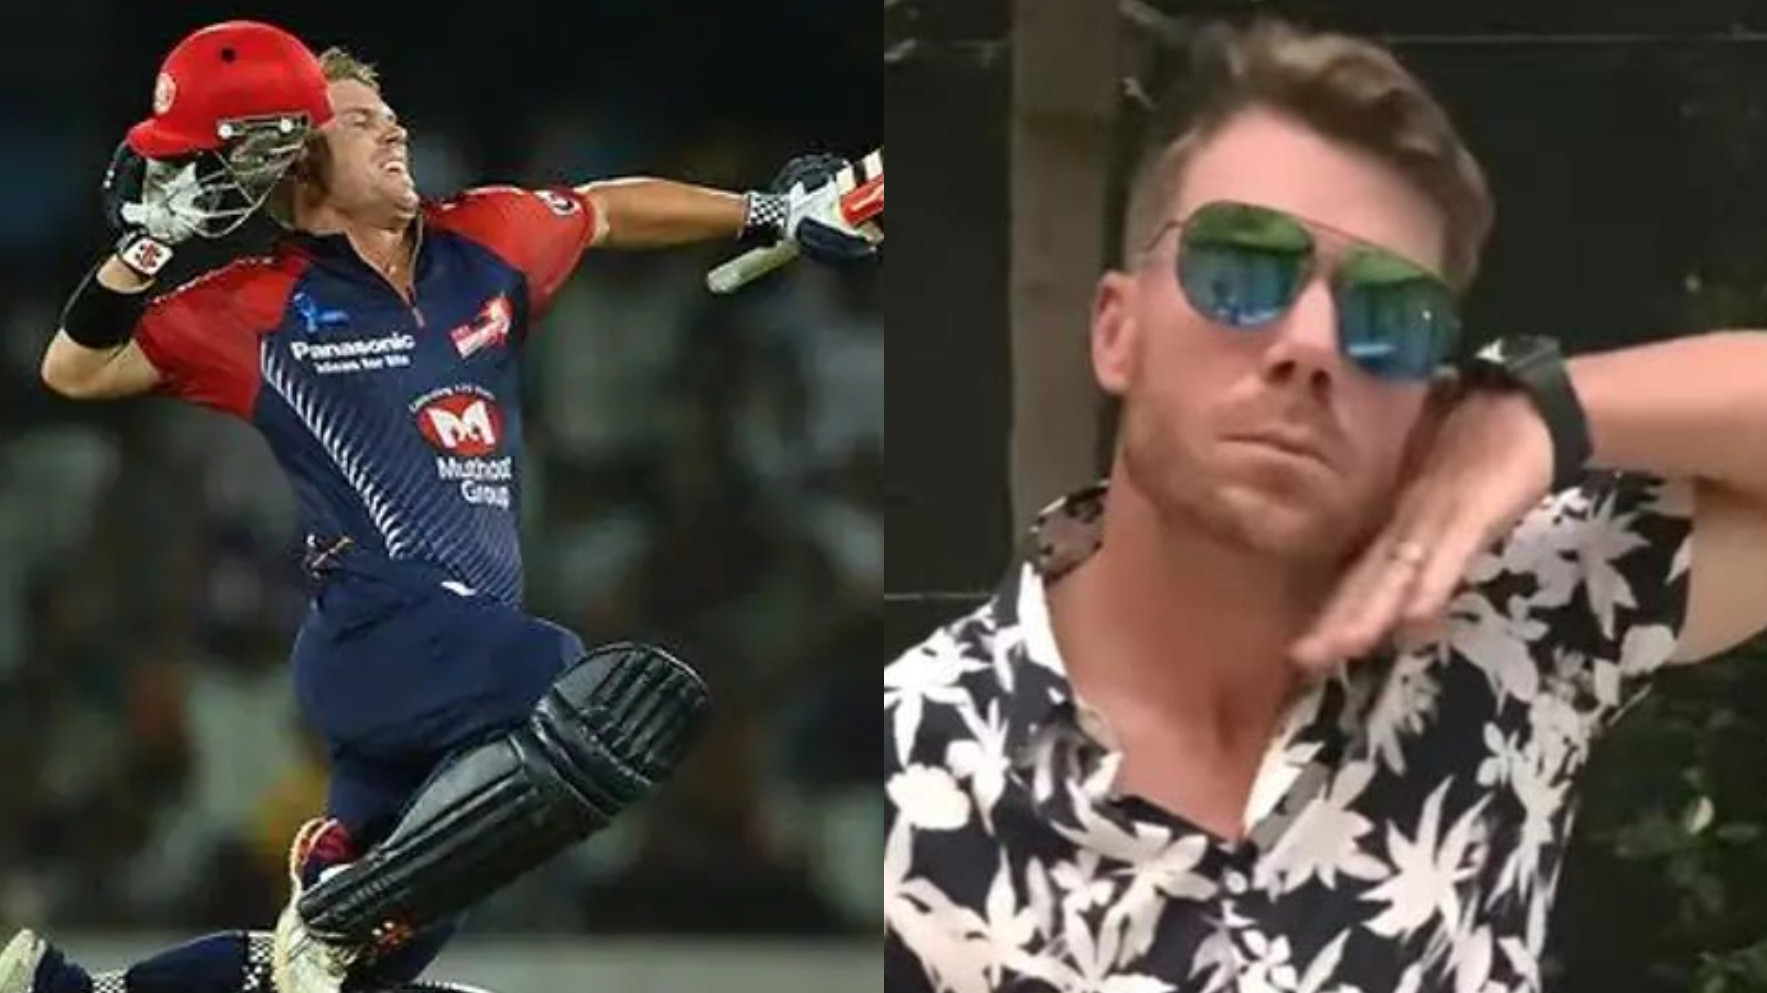 IPL 2022: “Need recommendations for new reels”: David Warner after being bought by Delhi Capitals